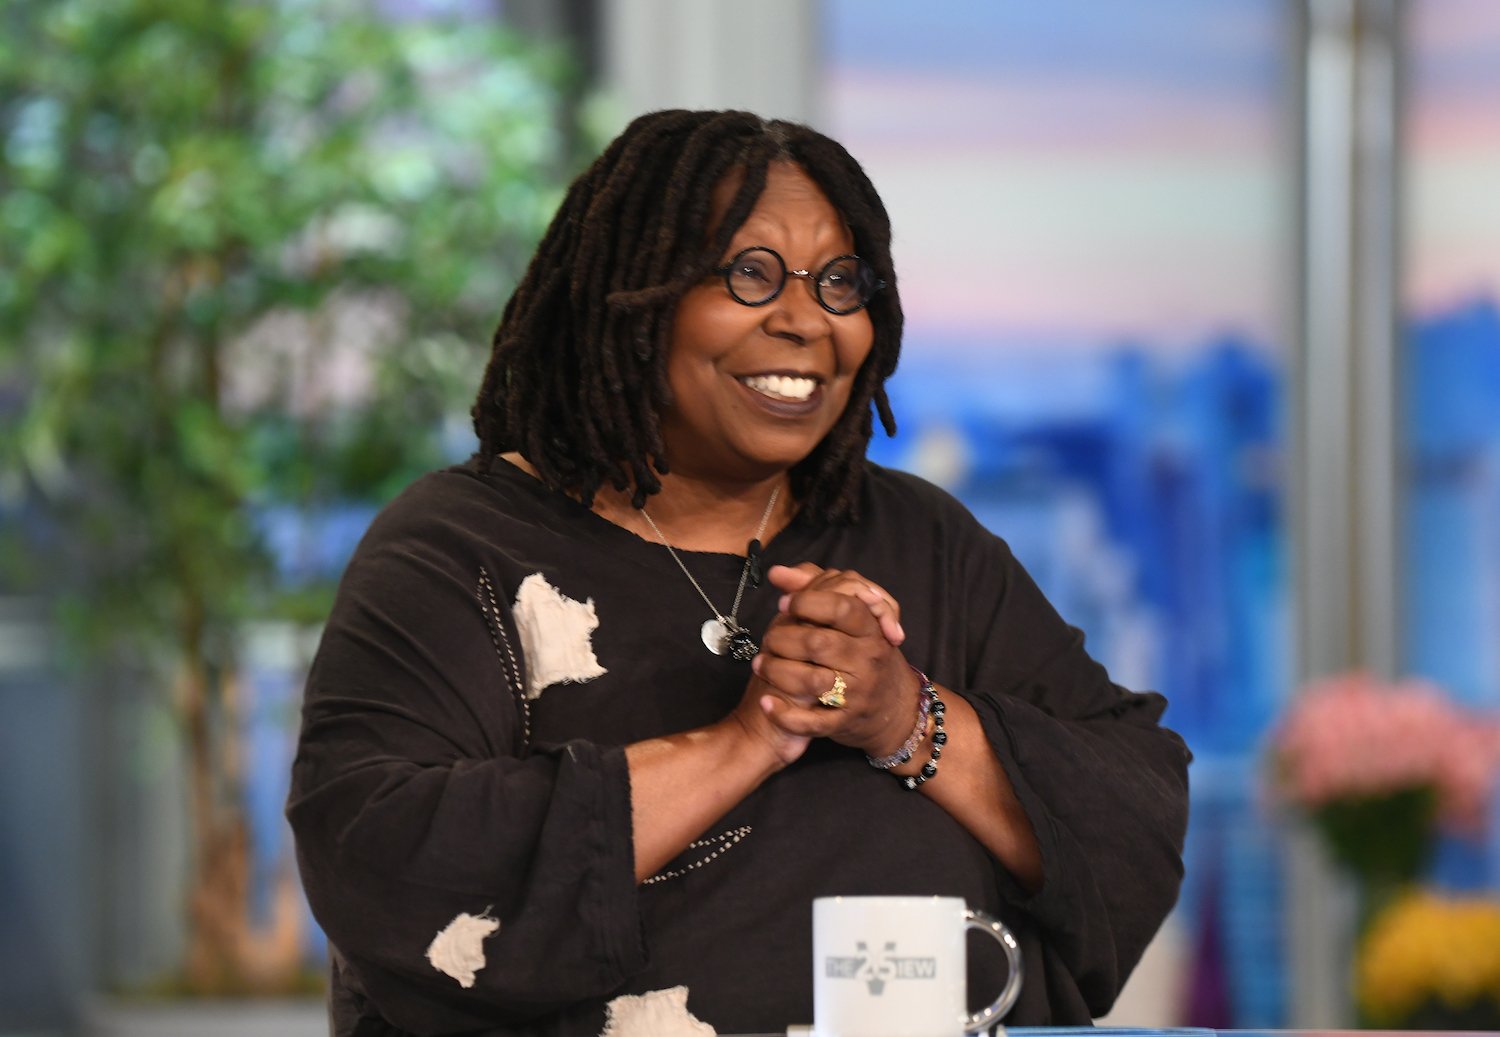 Whoopi Goldberg smiles as she holds her hands together